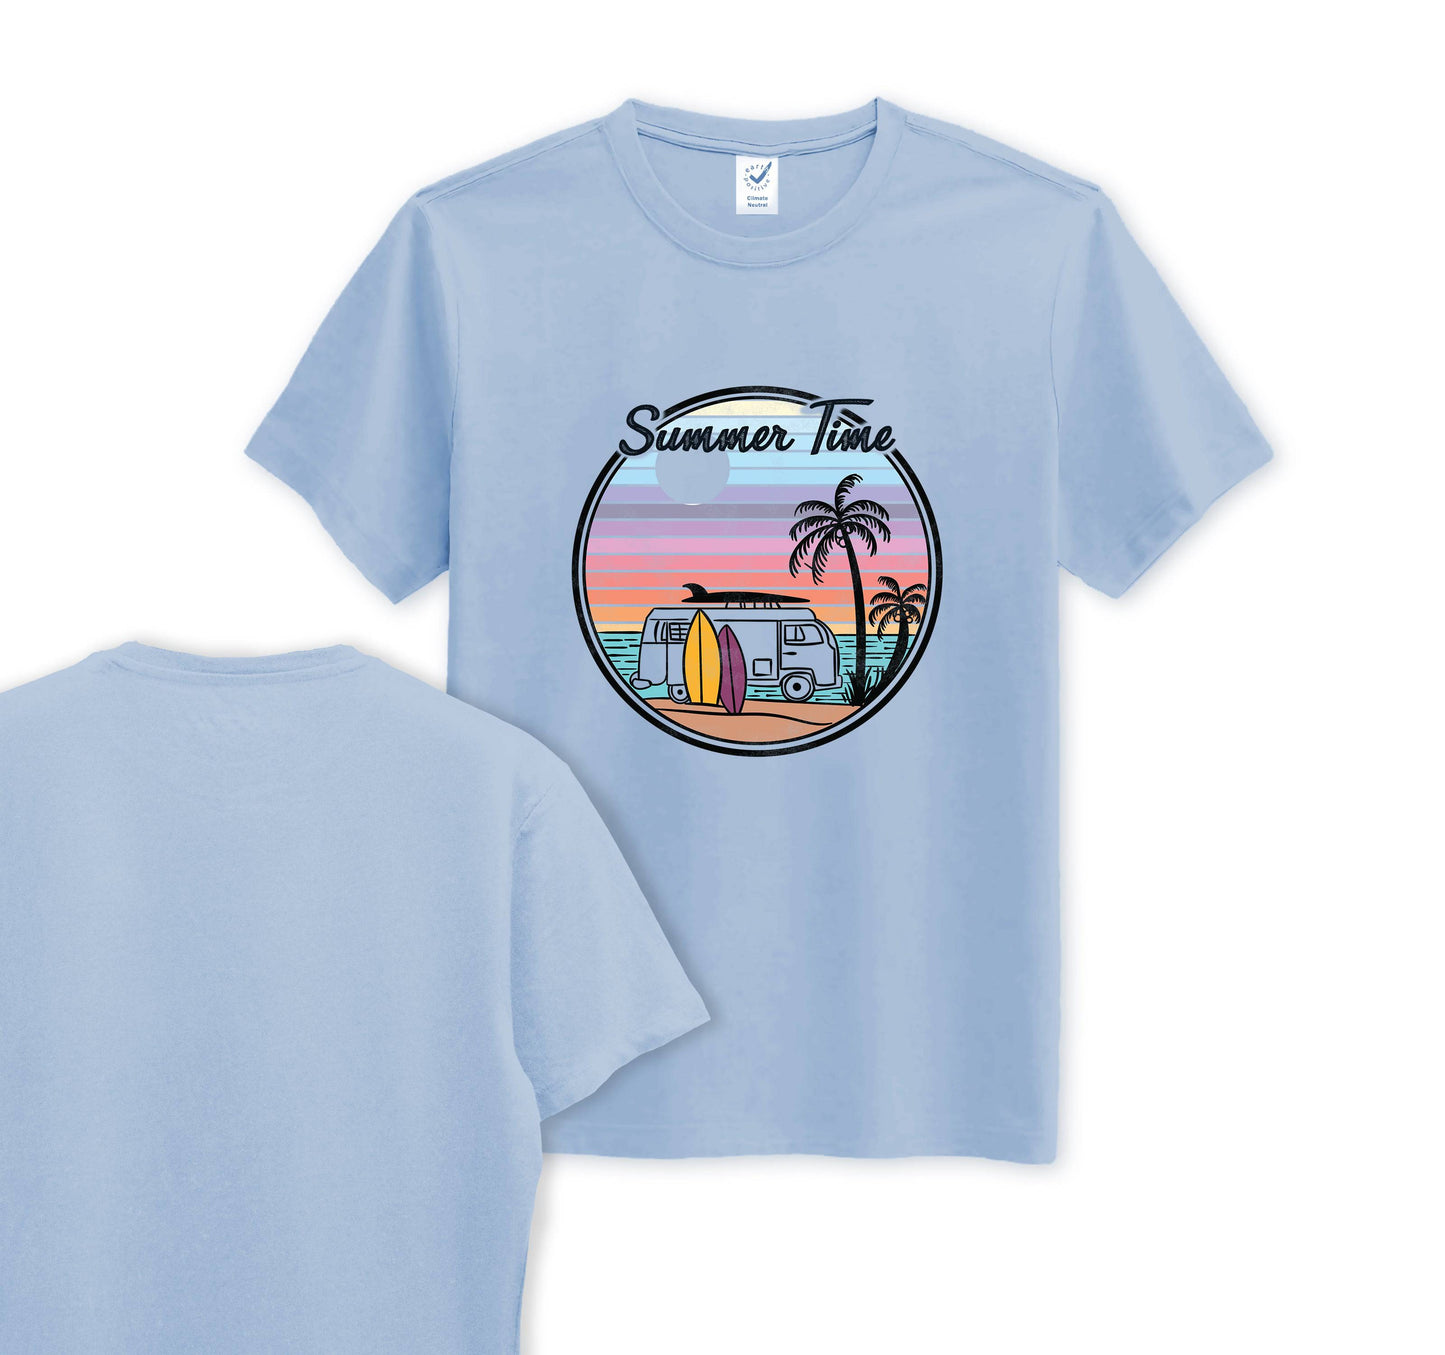 Summer Time - Organic Cotton Tee - Front Print - One Choice Apparel